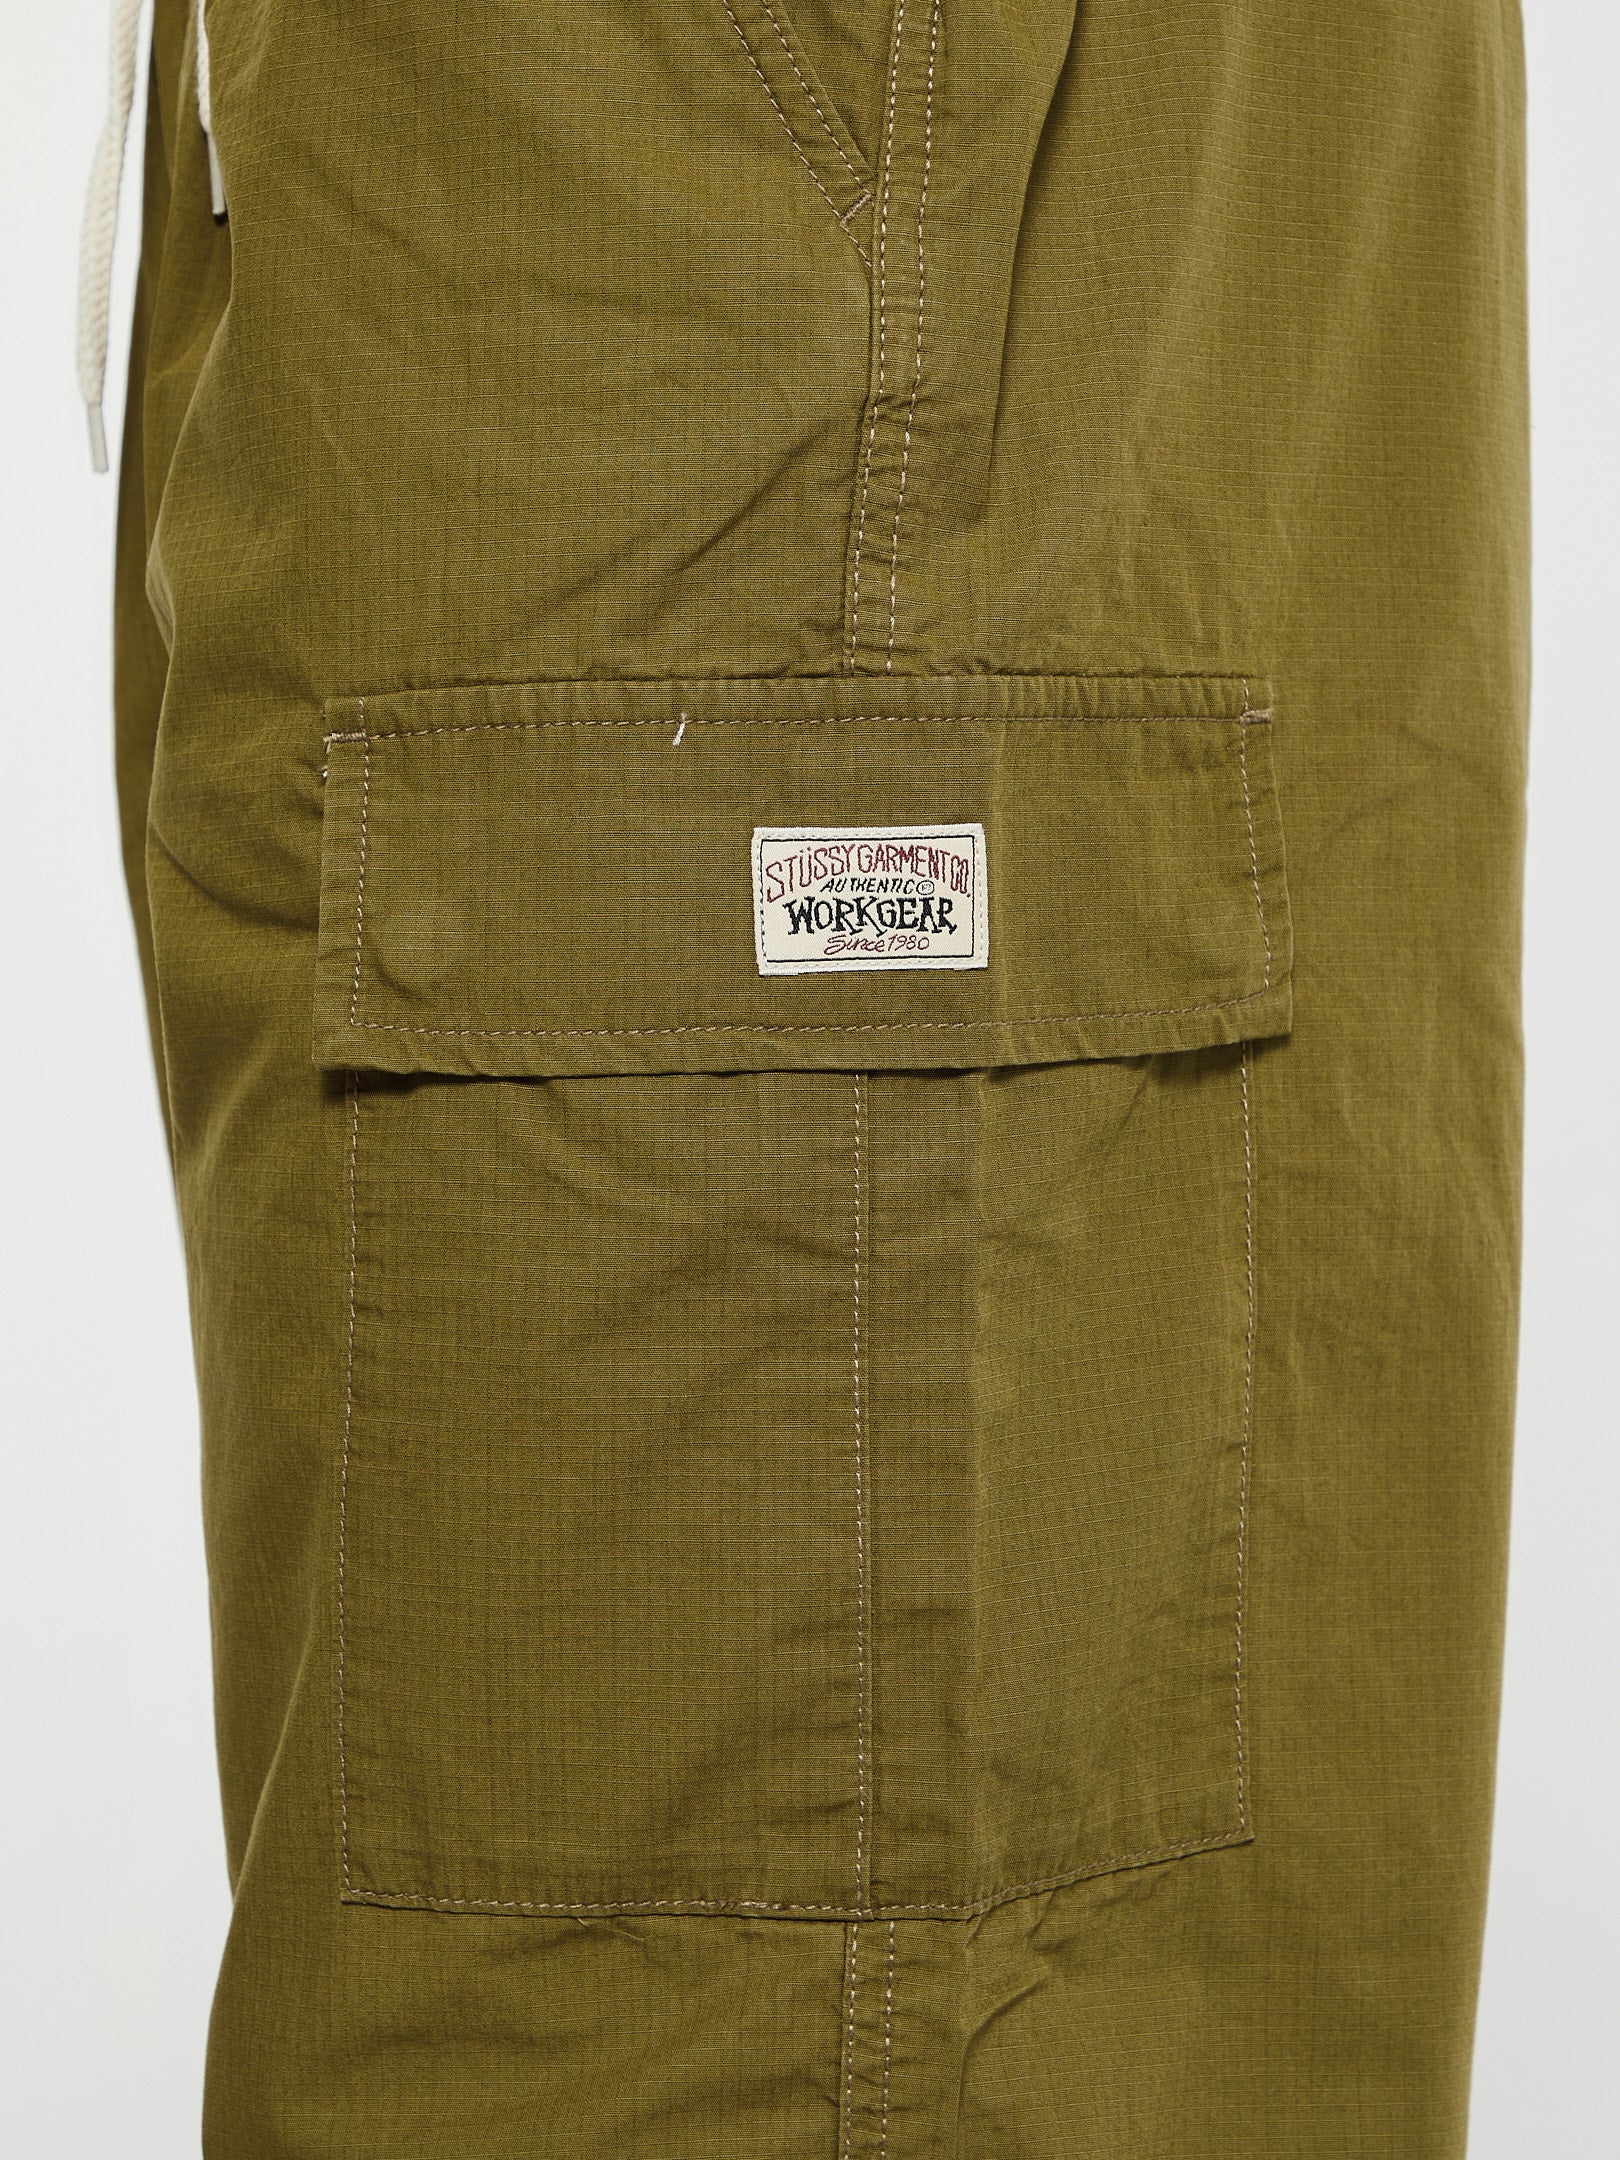 Jet Cargo Pants in Cypress Rinsed